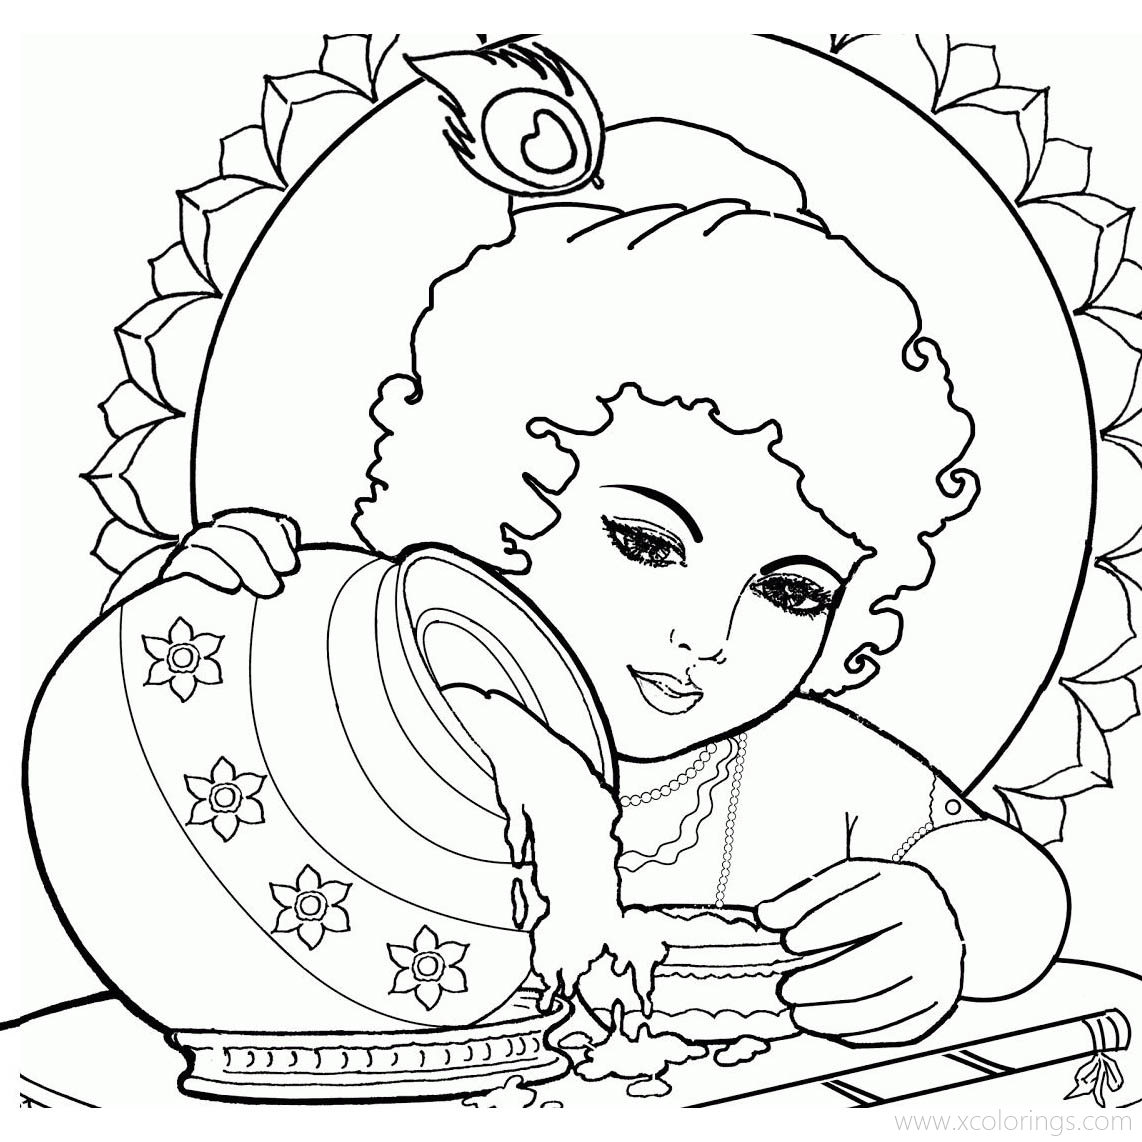 Free Krishna and Butter Coloring Pages printable